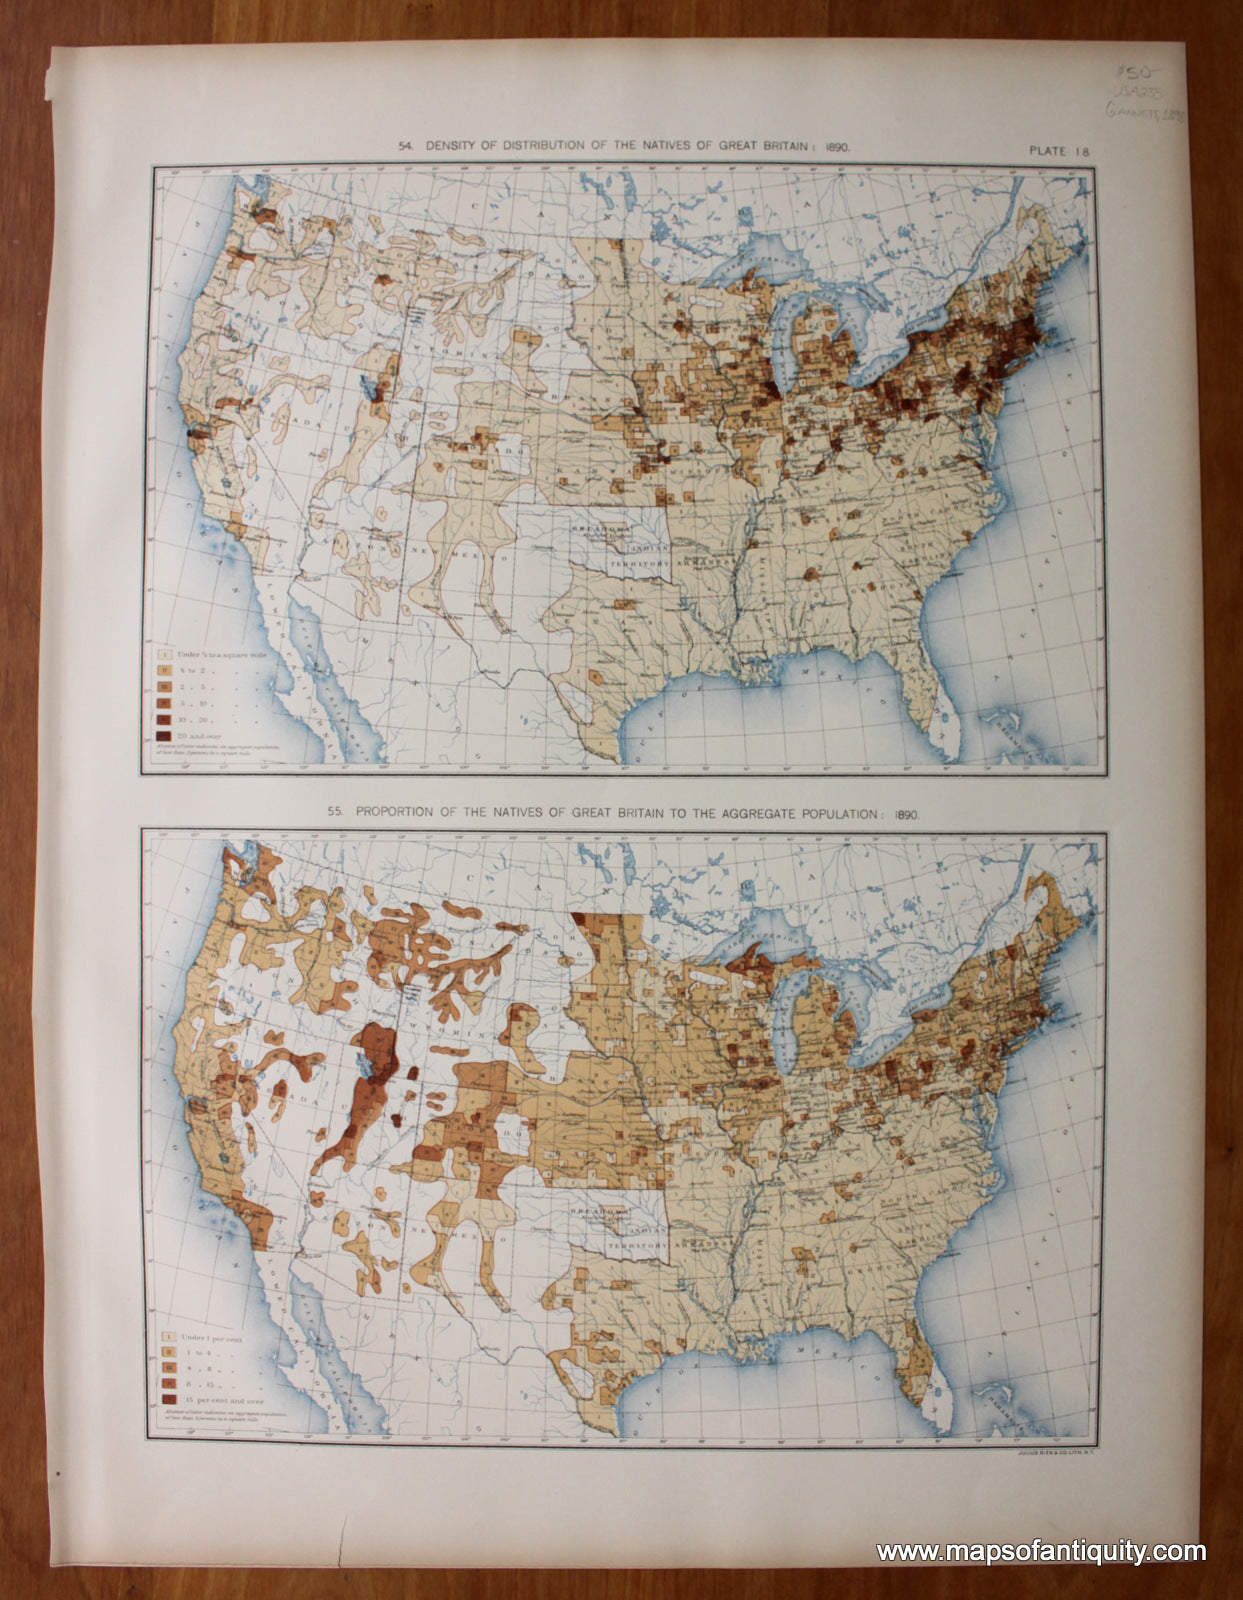 Antique-Printed-Color-Map-Density-of-Distribution-of-the-Natives-of-Great-Britain:-1890/-Proportion-of-the-Natives-of-Great-Britain-to-the-Aggregate-Population:-1890-United-States-United-States-General-1898-Gannett-Maps-Of-Antiquity